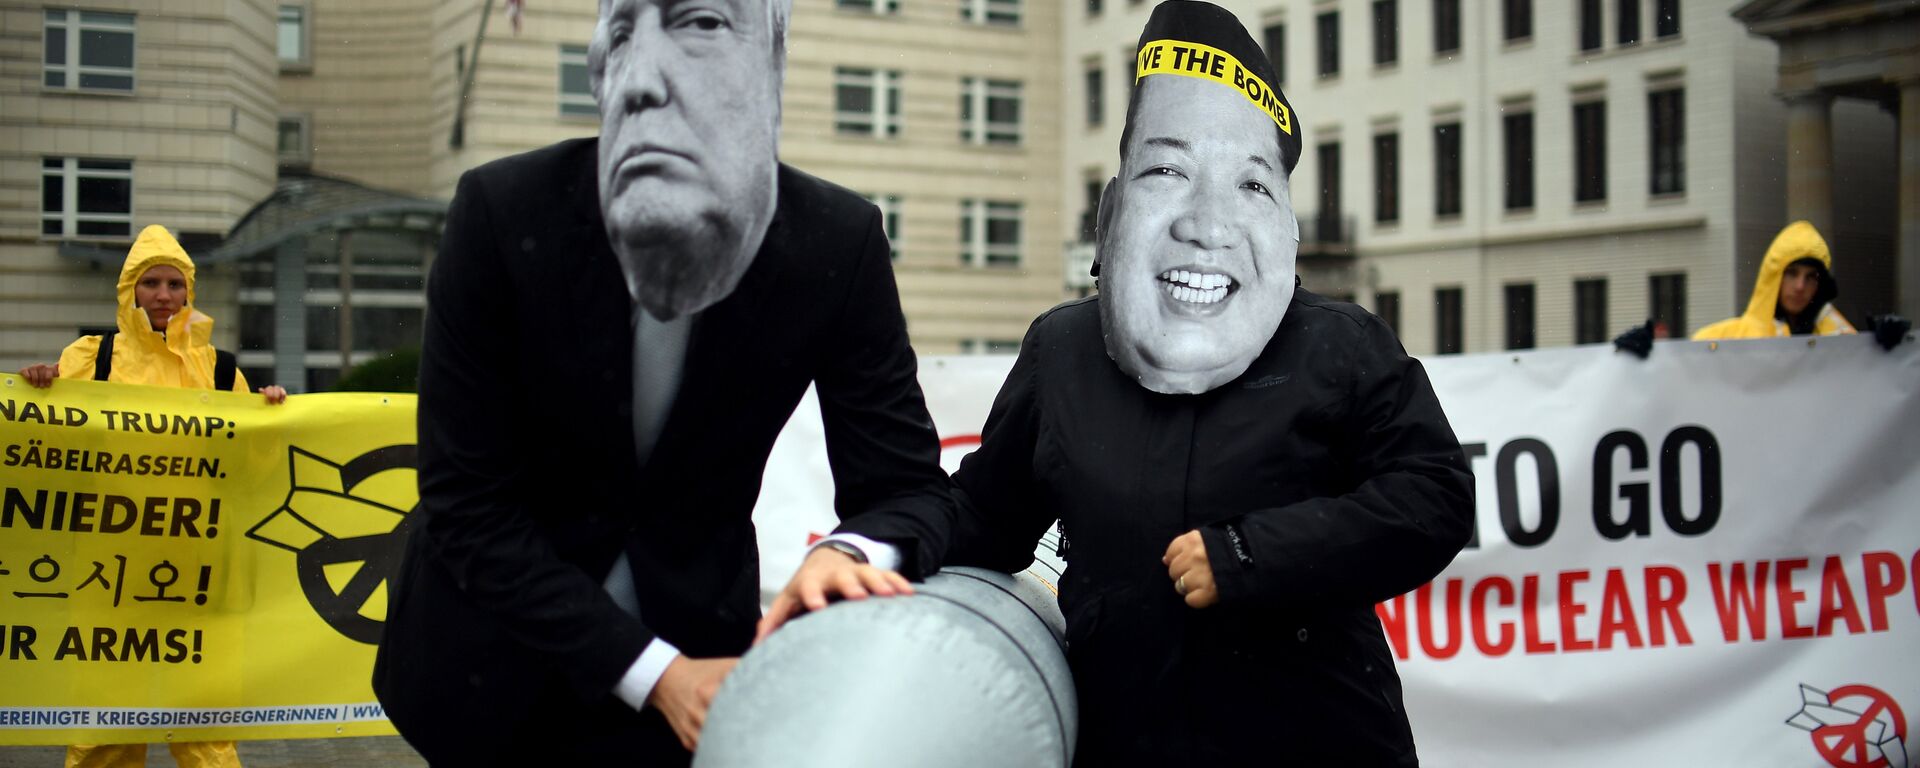 Activists of the non-governmental organization International Campaign to Abolish Nuclear Weapons (ICAN) wear masks of US President Donal Trump and leader of the Democratic People's Republic of Korea Kim Jon-un while posing with a mock missile in front of the embassy of Democratic People's Republic of Korea in Berlin, on September 13, 2017 - Sputnik International, 1920, 16.09.2017